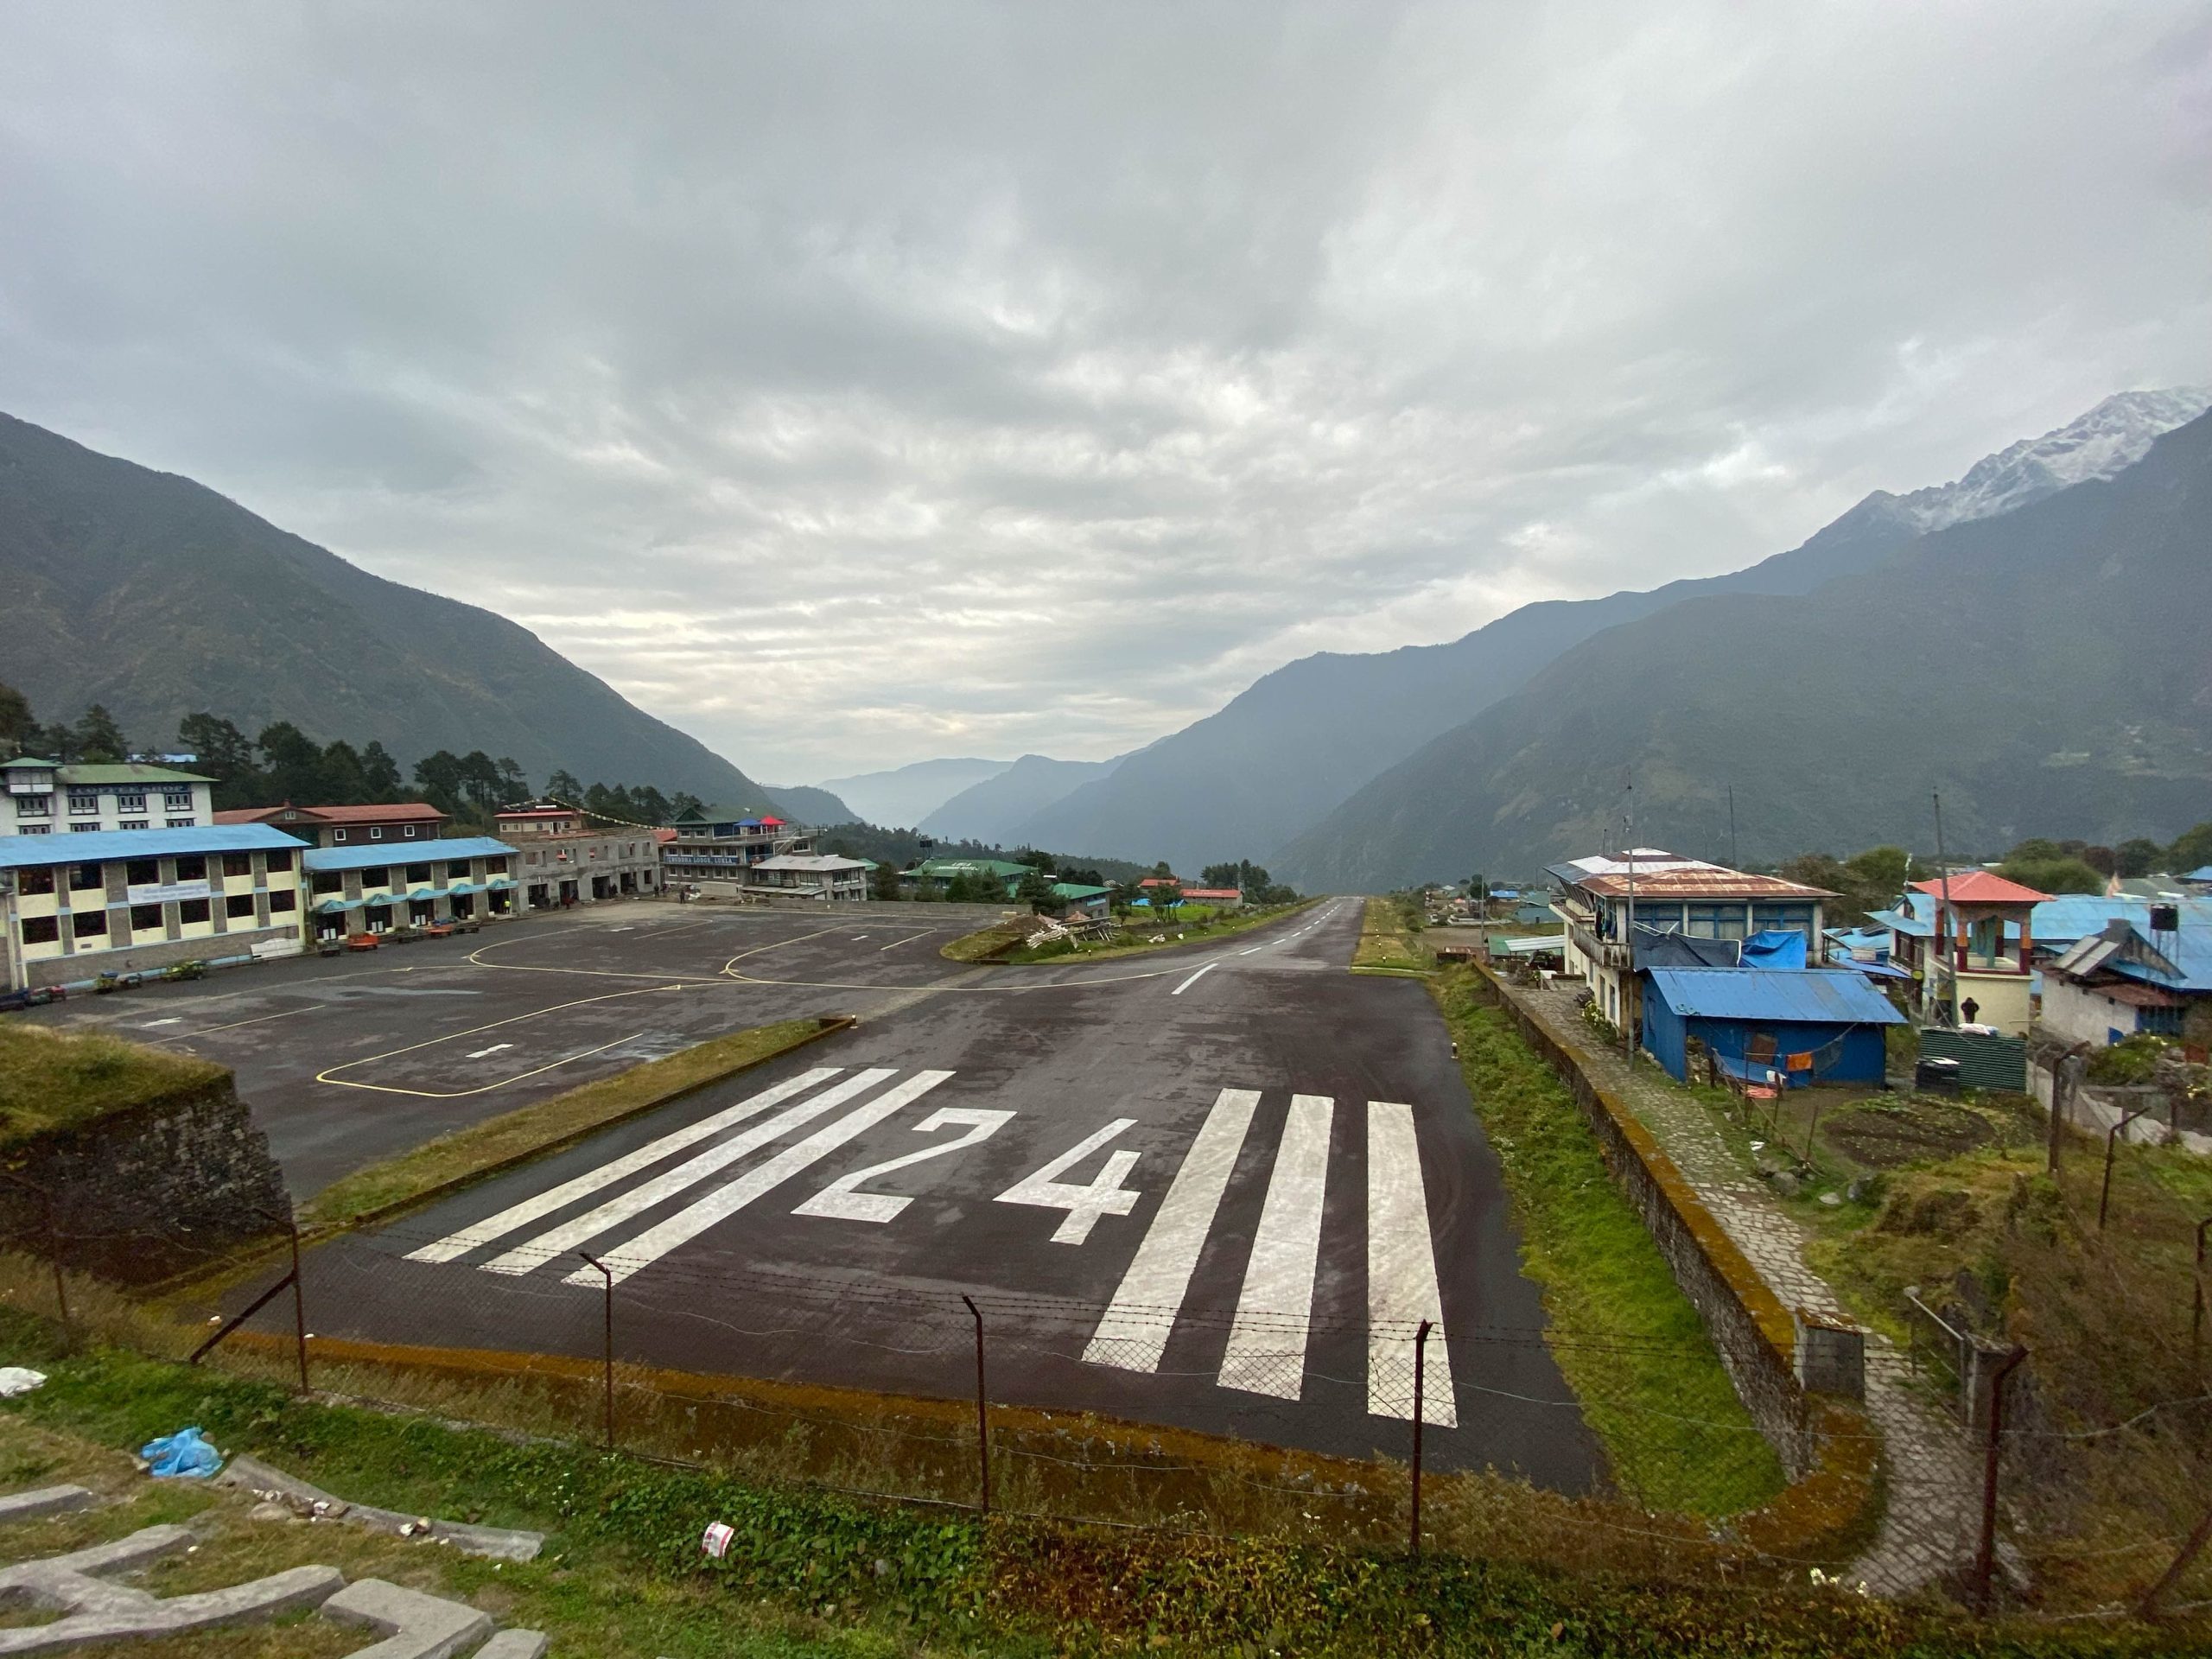 Looking down the Lukla airport runway, which slopes downward at 20 degrees and is the starting point for the trek. (photo by Roberto Camassa)